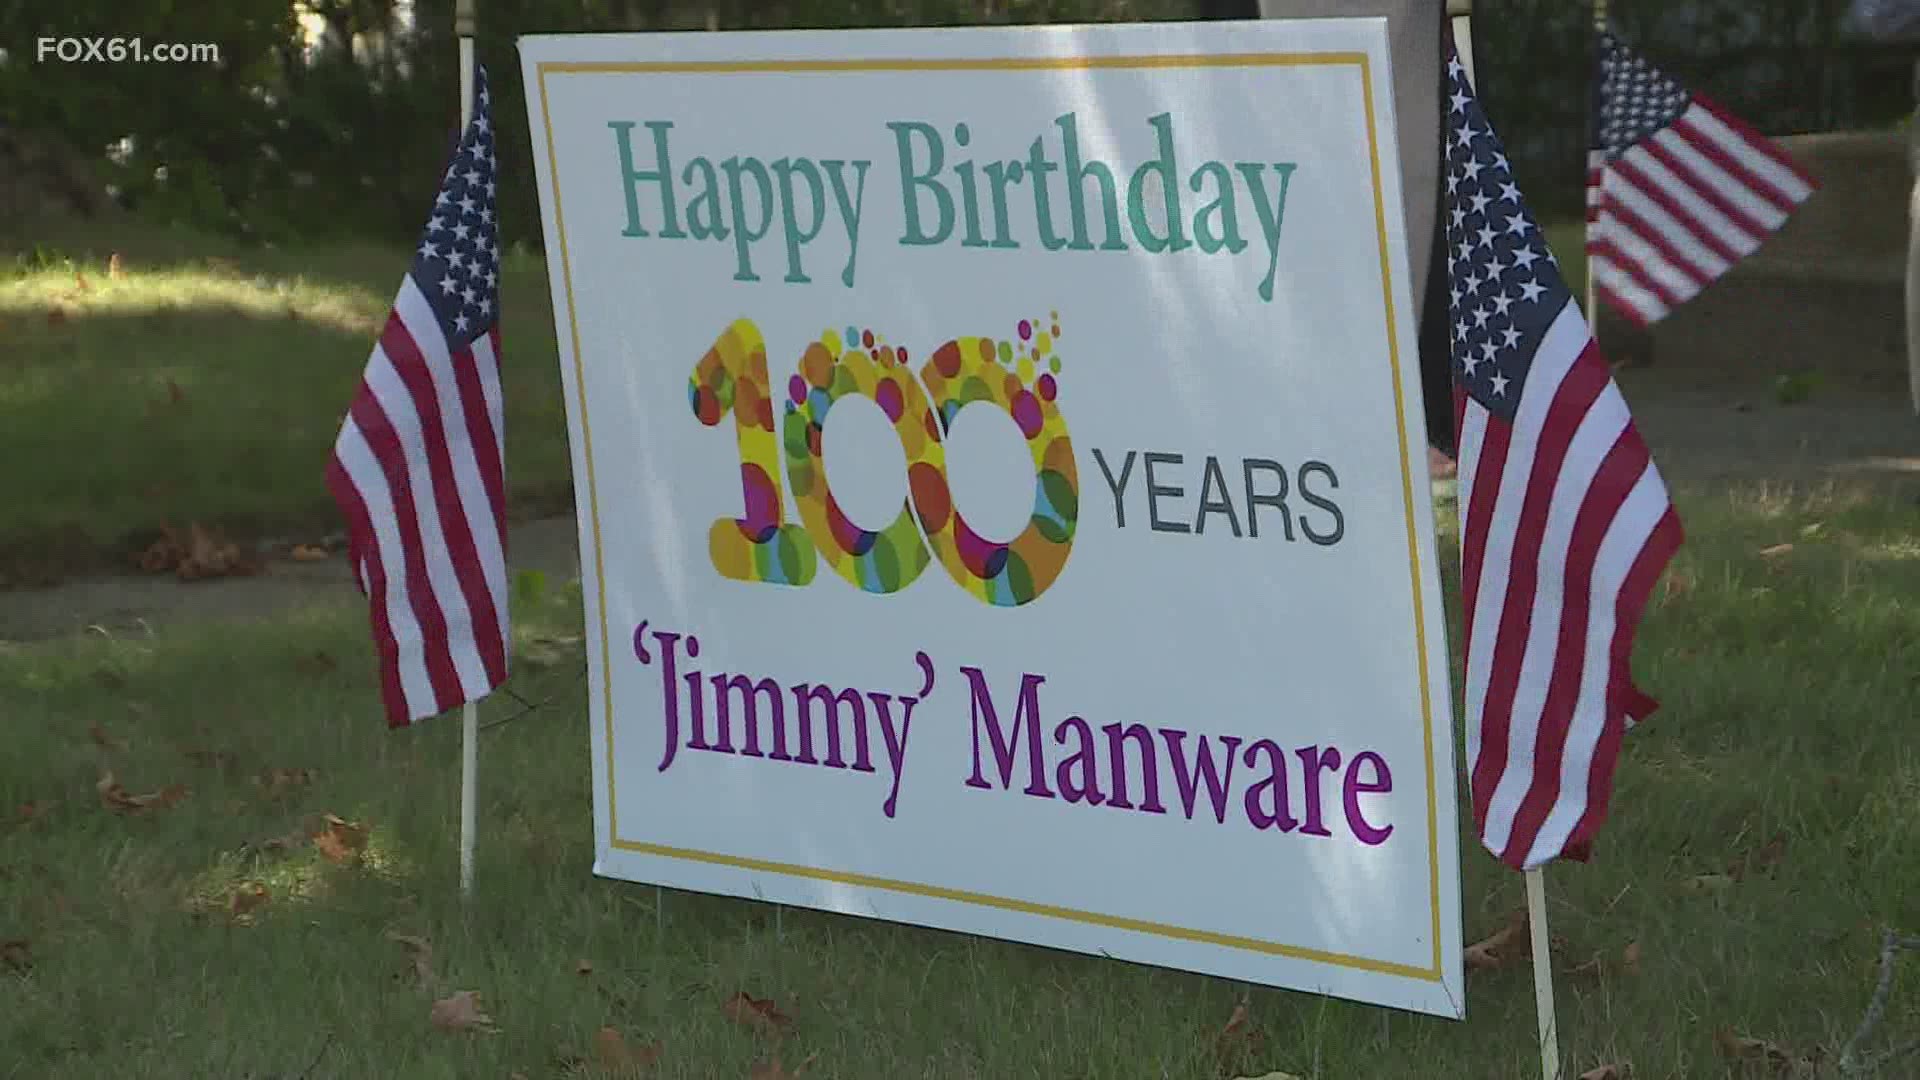 Jimmy Manware was a medic in the Army Air Corps during World War II.